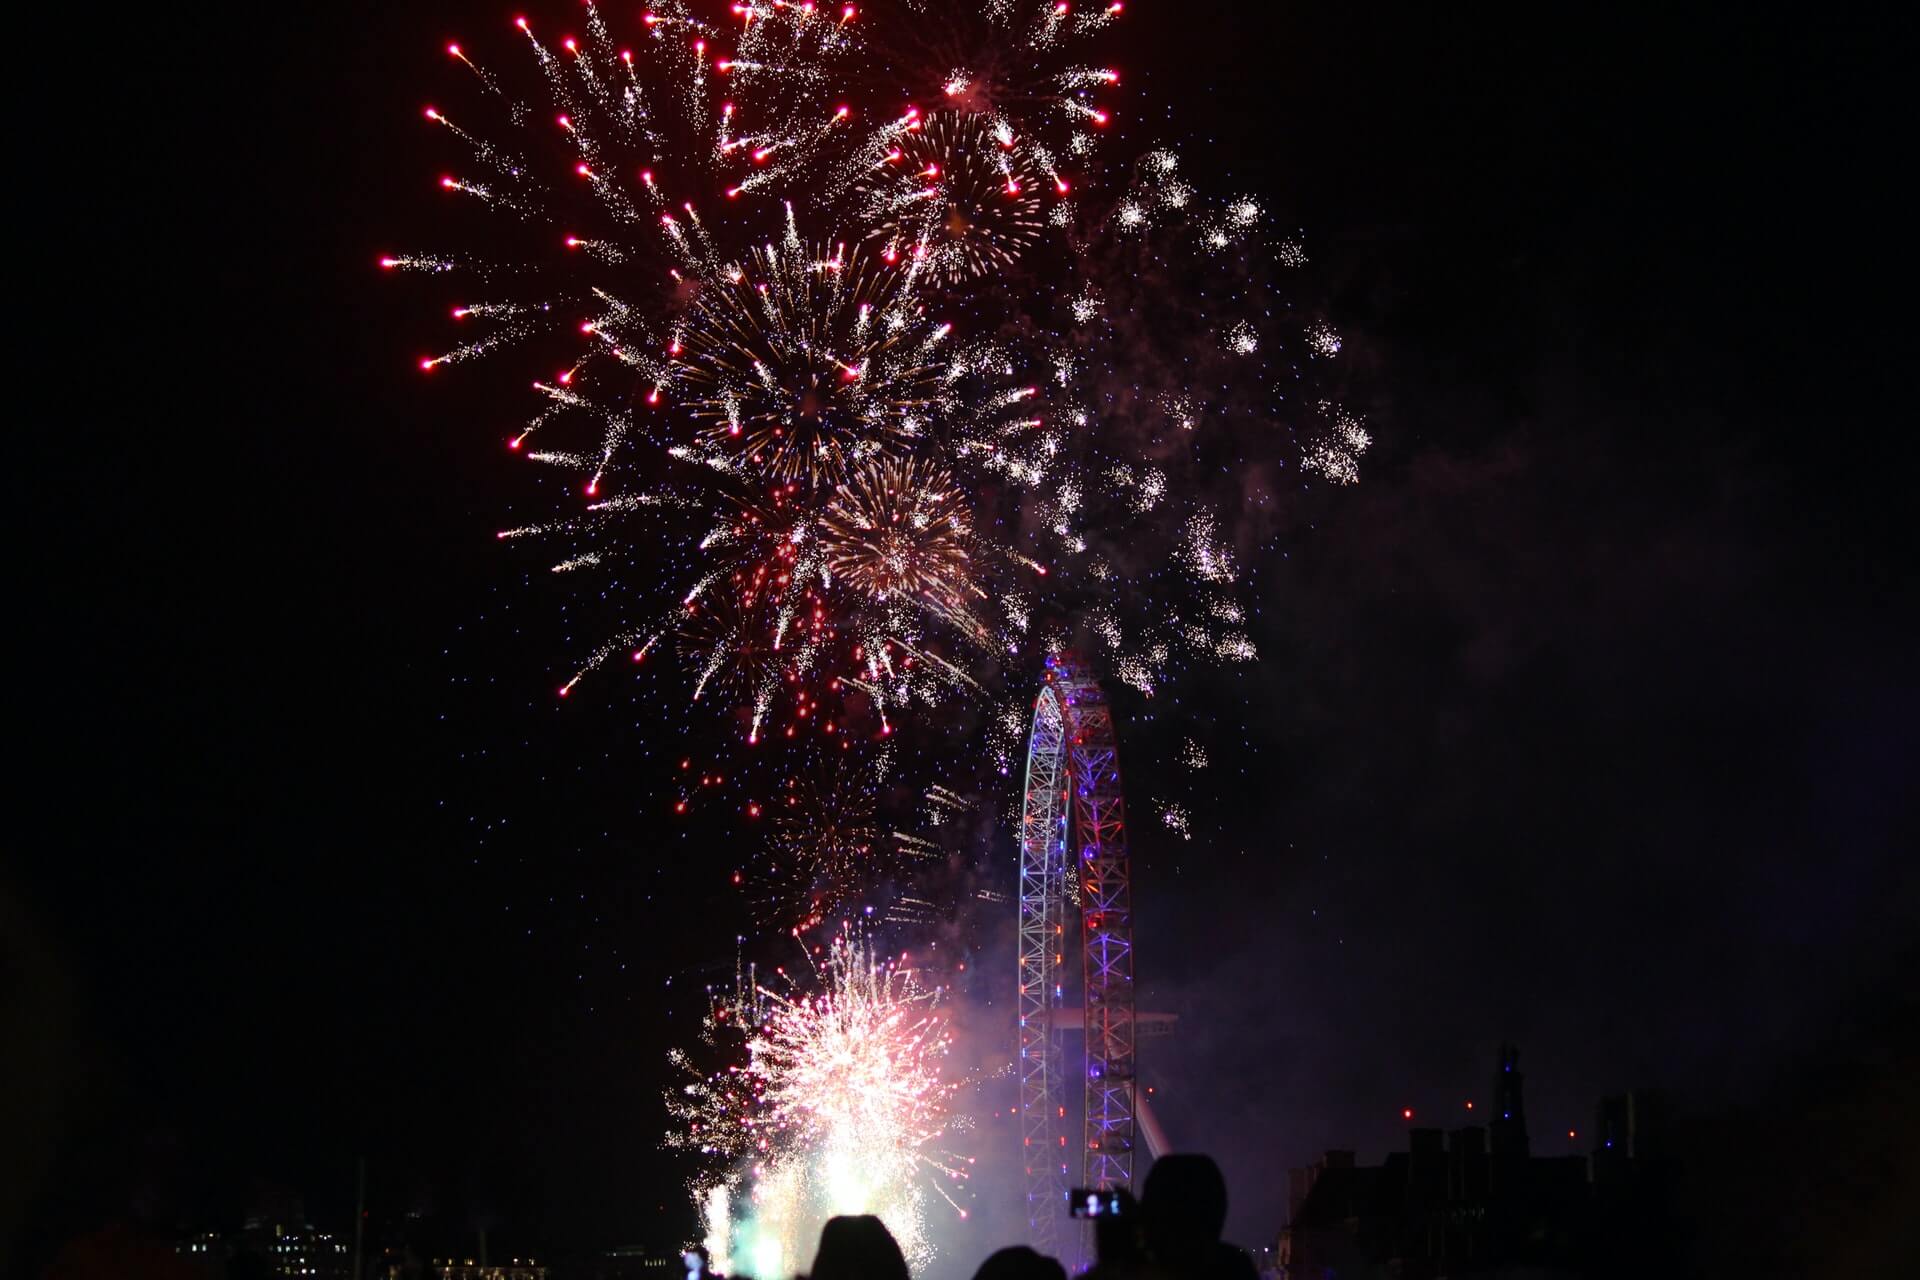 The best places to watch firework displays in the UK for Bonfire Night